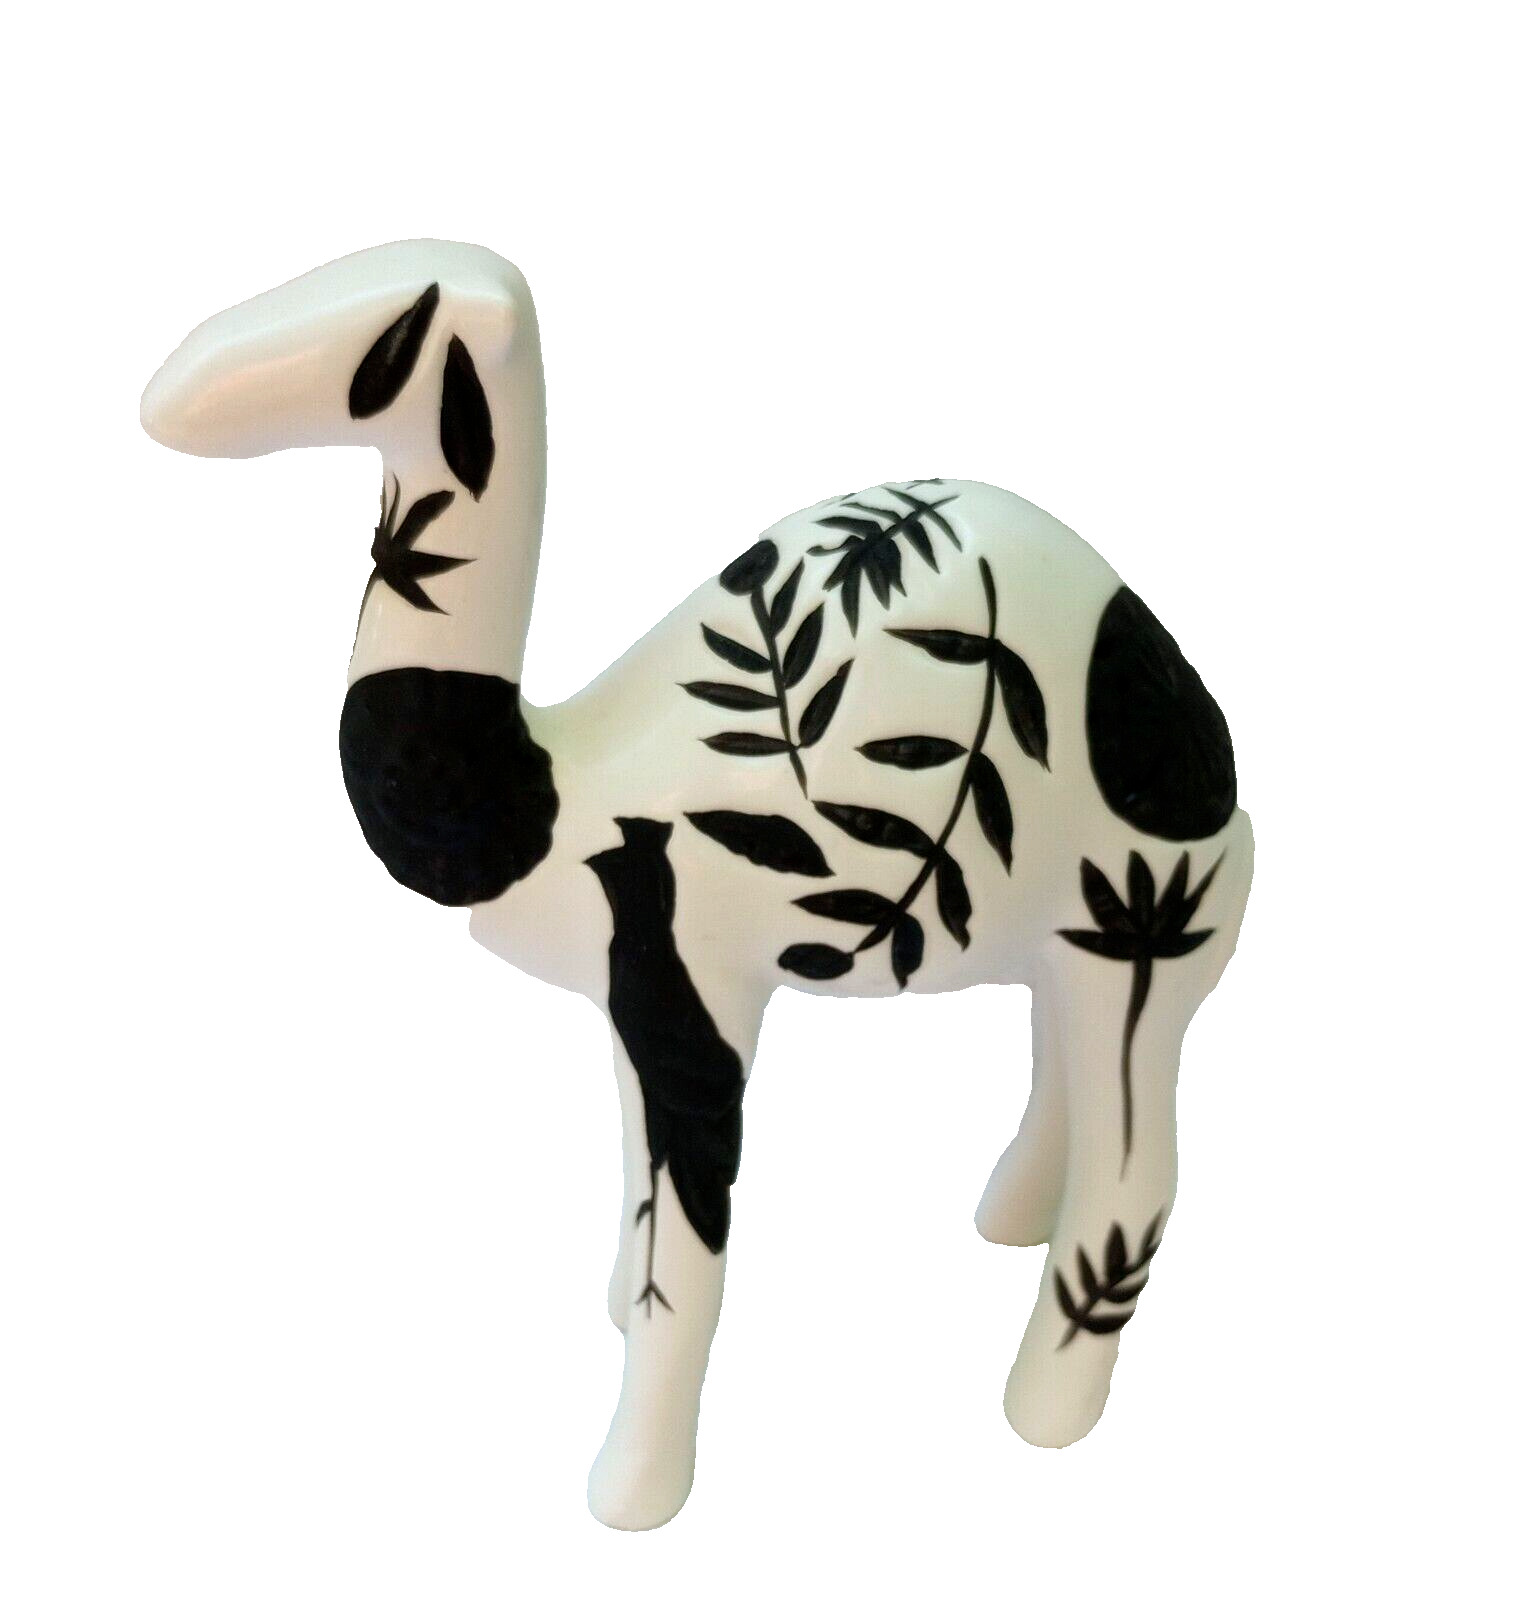 Nate Berkus Camel Figurine from 2017 Collection White with Black Designs Ceramic